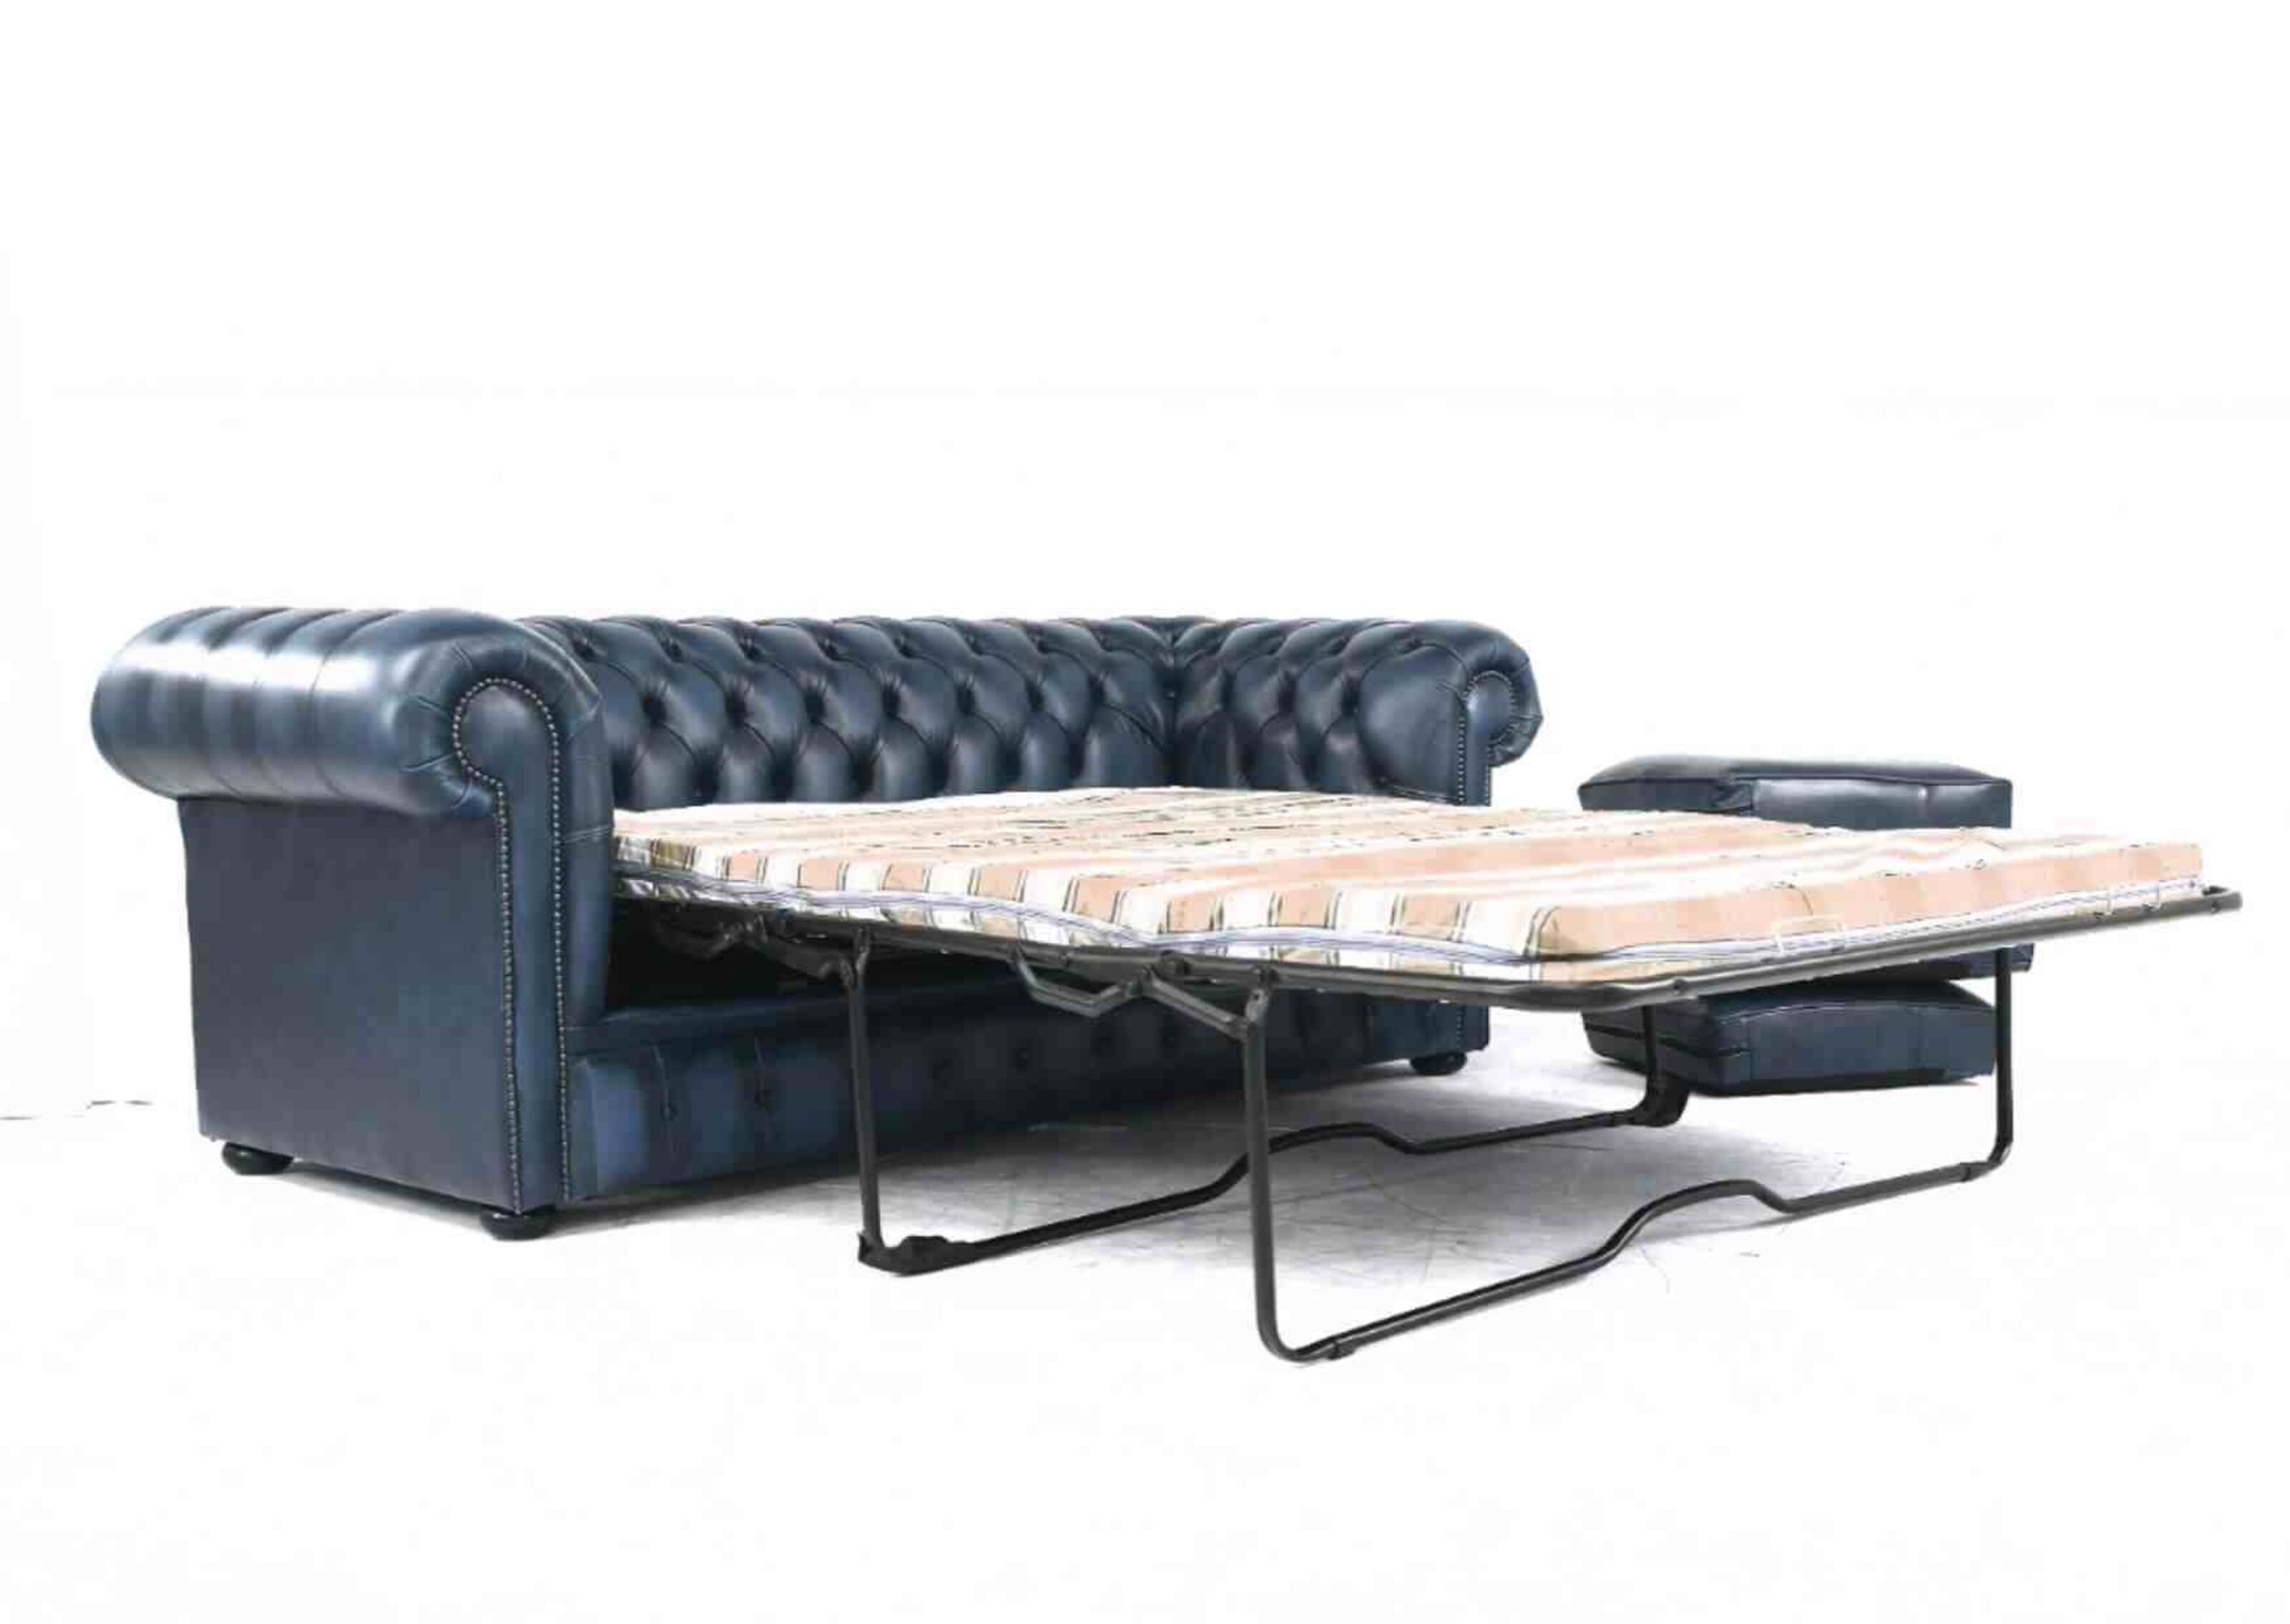 Sleek and Sleep-Ready Leather Chesterfield Sofa Beds  %Post Title